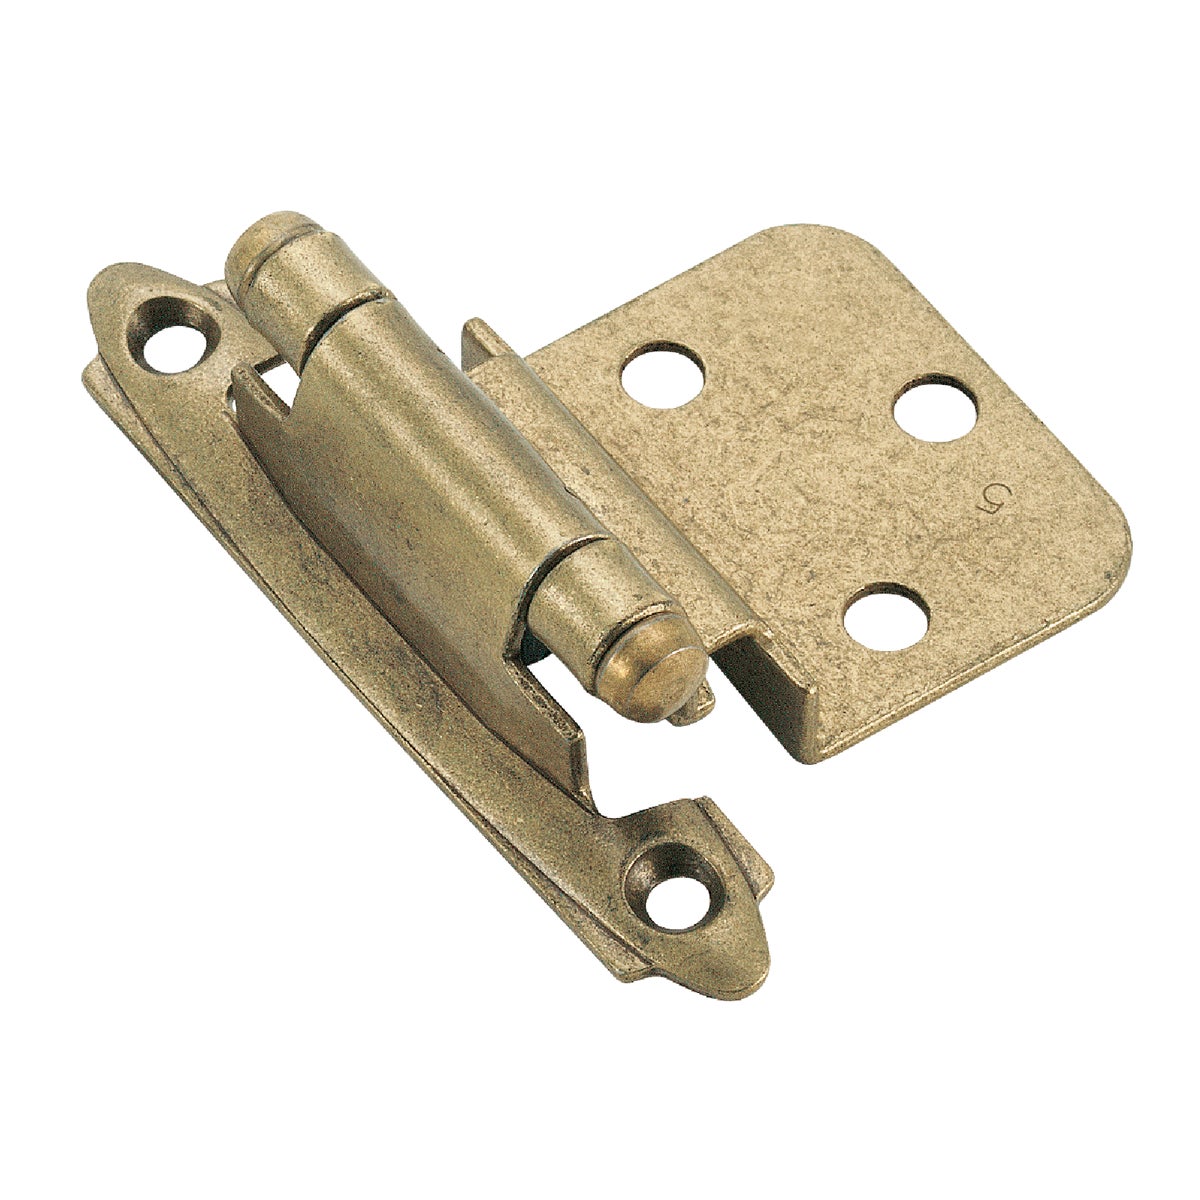 Amerock Burnished Brass 3/8 In. Self-Closing Inset Hinge, (2-Pack)